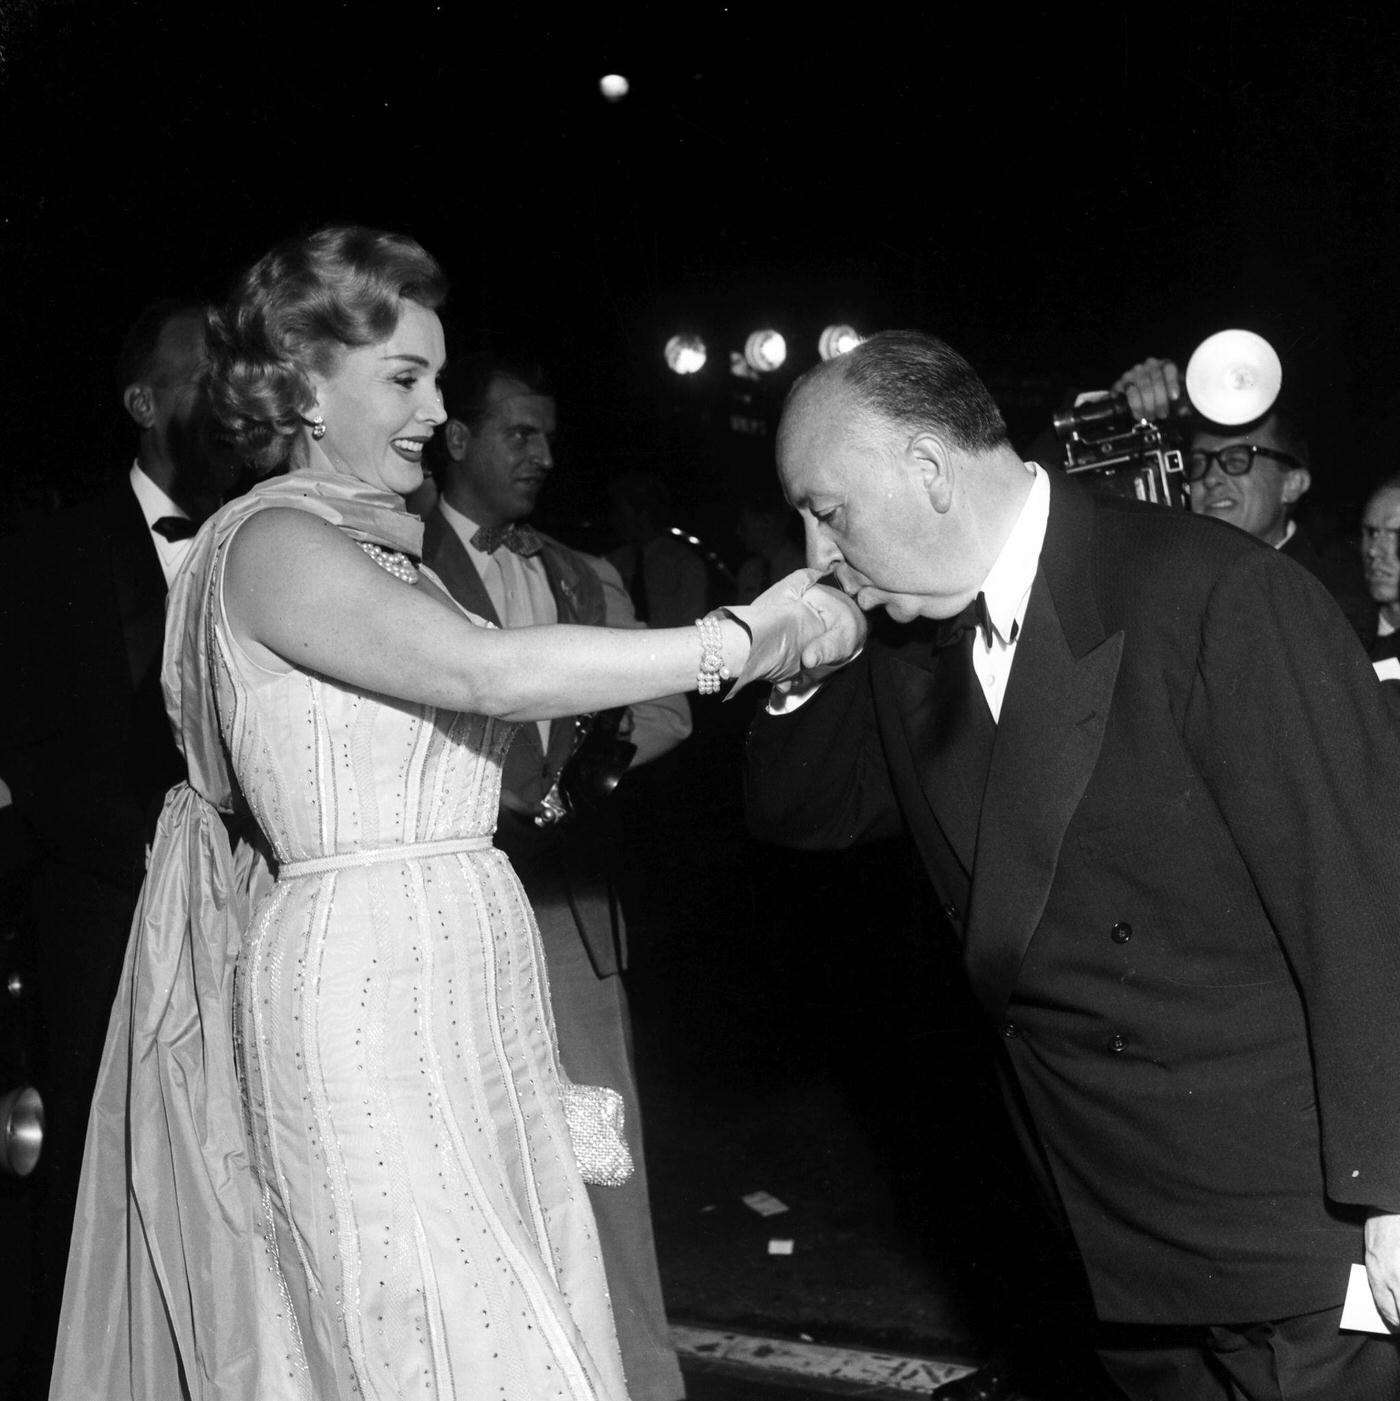 Director Alfred Hitchcock with guest at the premier of "Rear Window" in Los Angeles